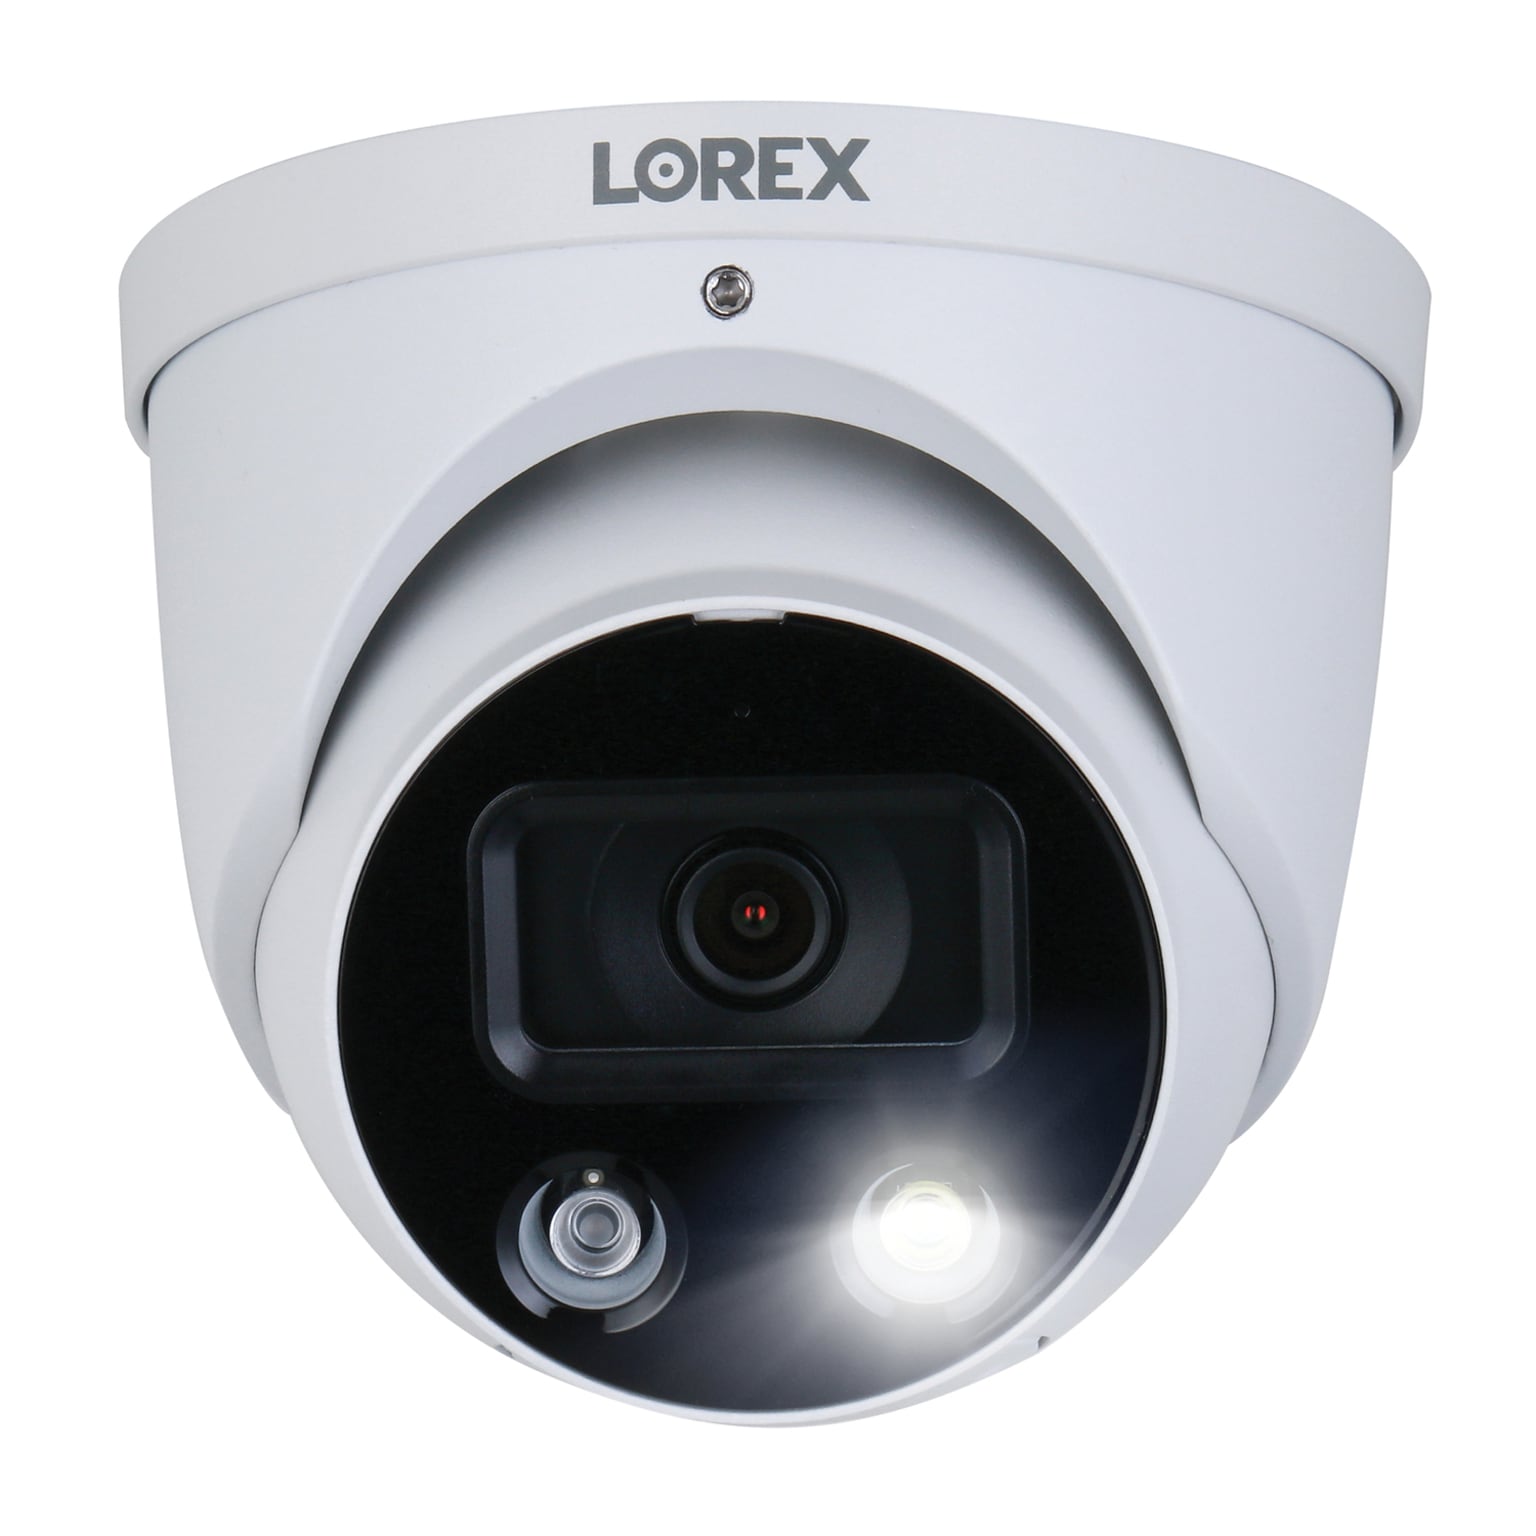 Lorex 4K Ultra HD Indoor/Outdoor Add-on IP Dome Security Camera with Smart Deterrence Plus, White (E893DD-E)